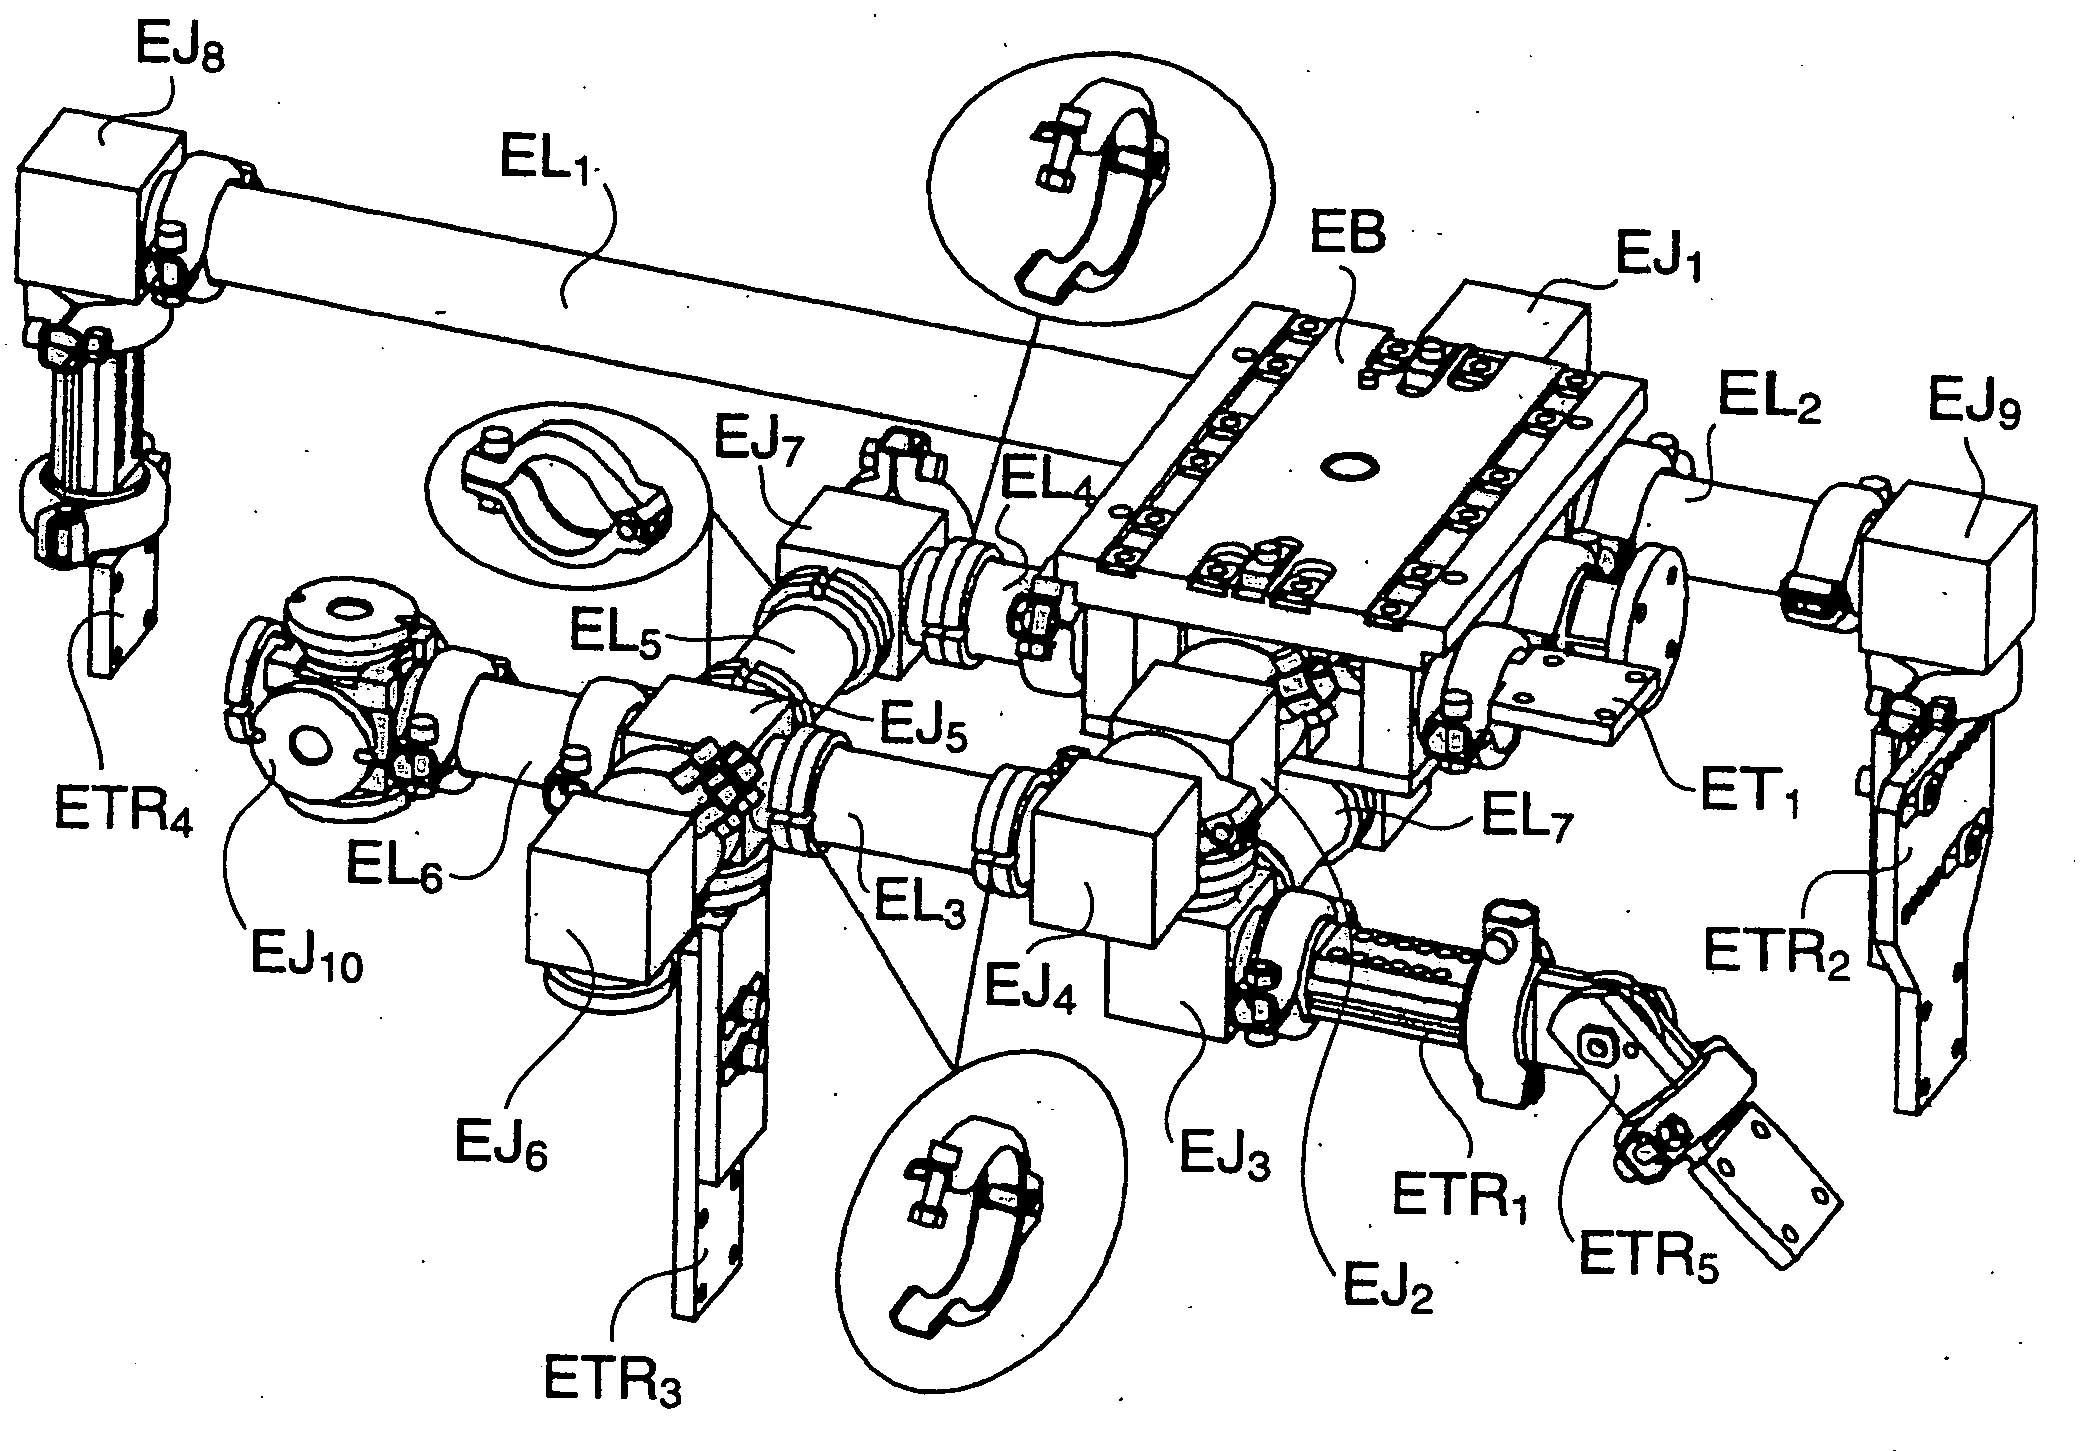 Device for the assembly of standard elements intended for the creation of precision mechanical structures